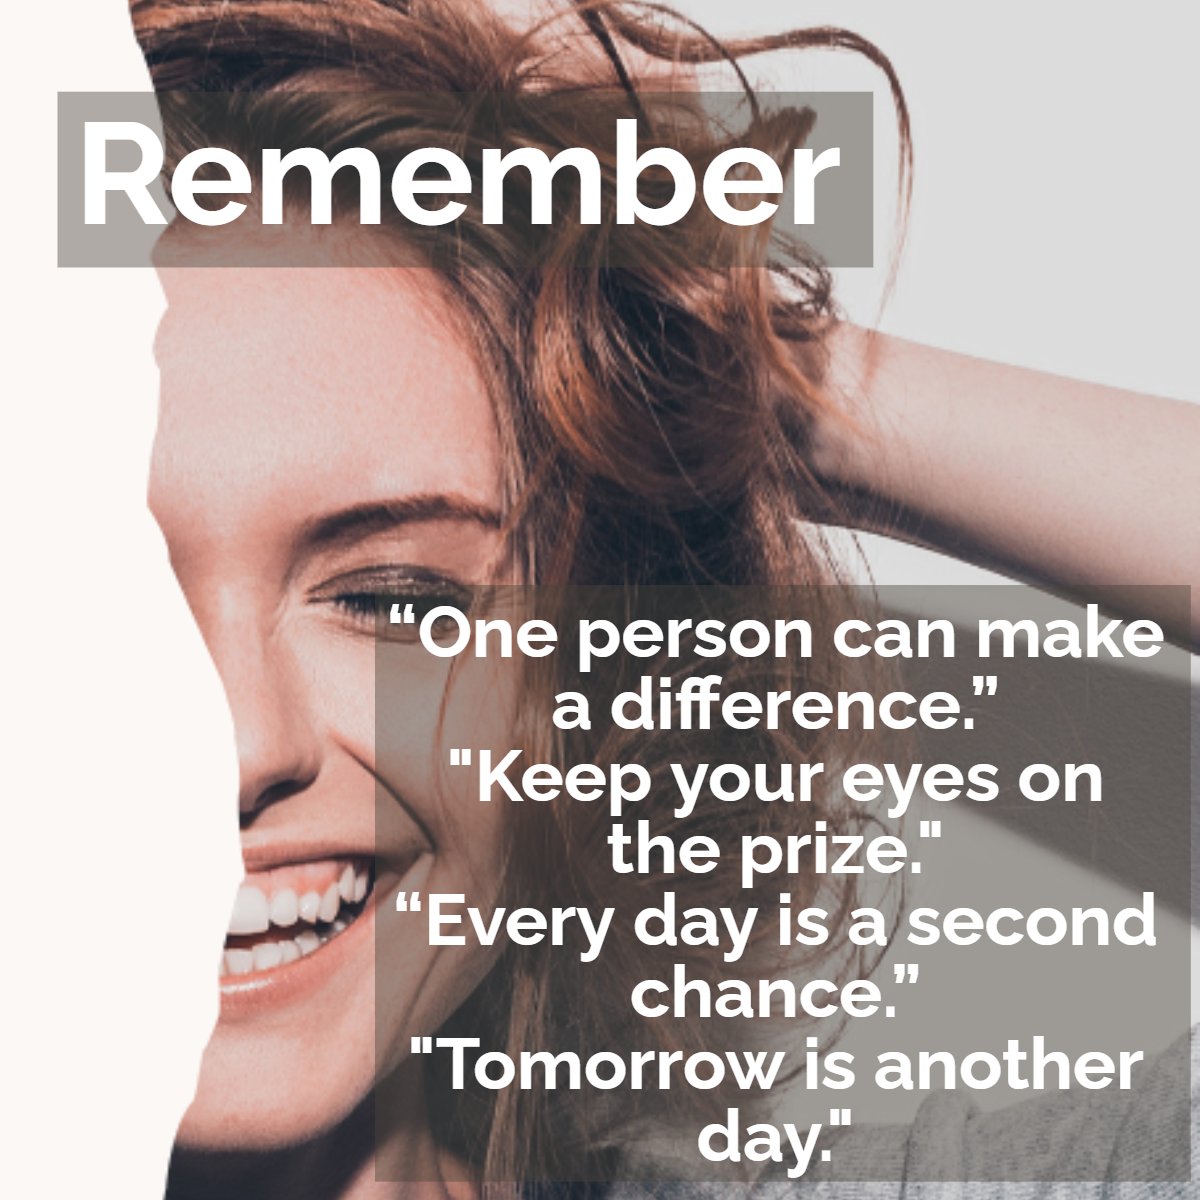 What would you like to remember today?

Feel free to share it below!

#Motivation #Motivational
 #realestateagent #investors #firsttimehomebuyer #militaryhomebuyers #homebuyers #realestateusa #housegoals #realestategoals #REALTOR #ColumbiaSCrealestate #househunting